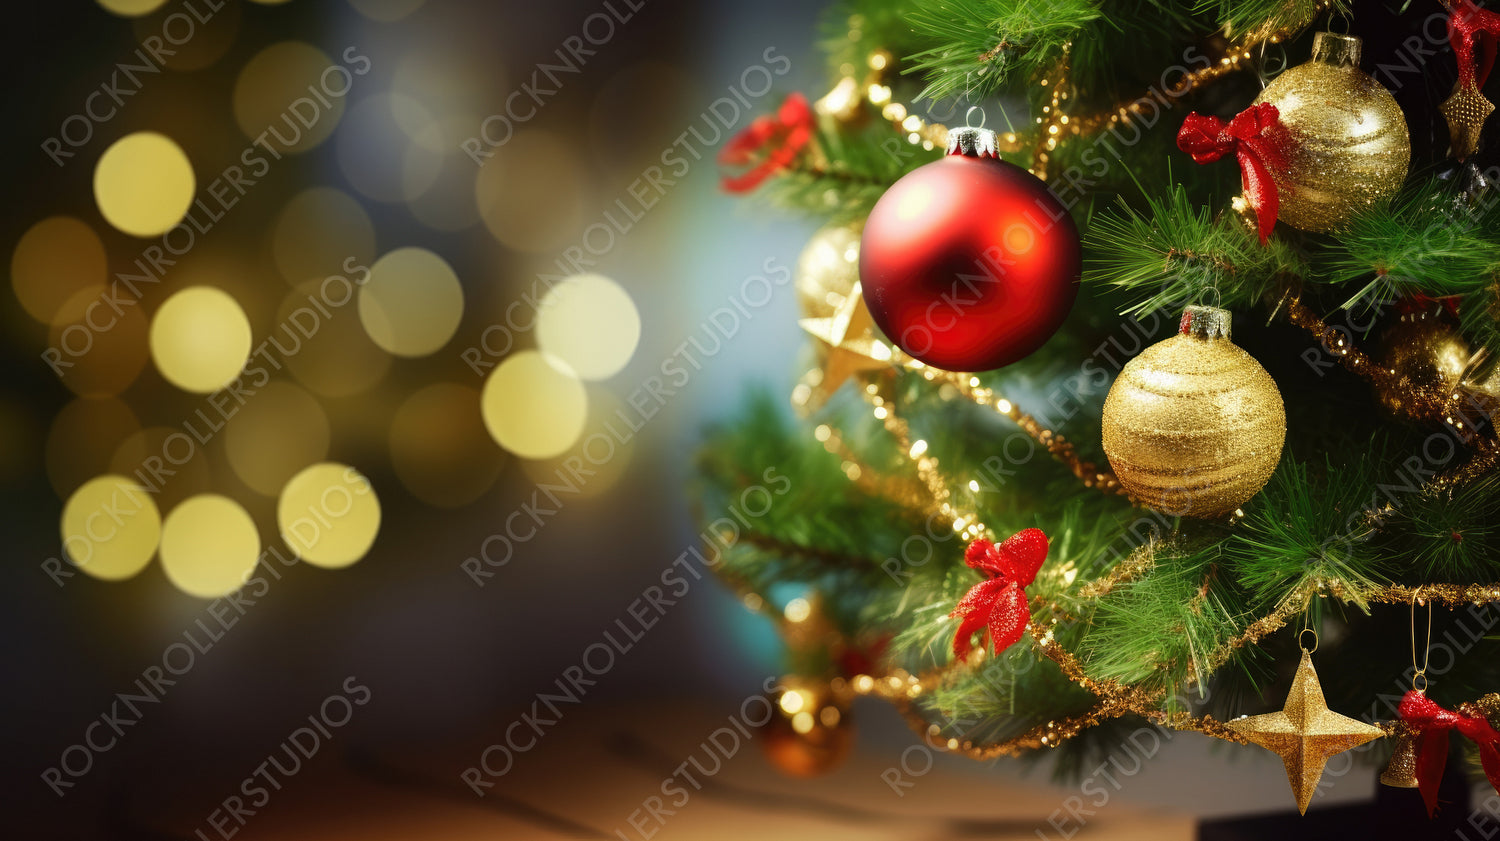 Festive green Christmas tree decorated with gold and red balls and bows with soft focus in evening and beautiful dark blurred defocused sparkling background with golden highlights, copy space.